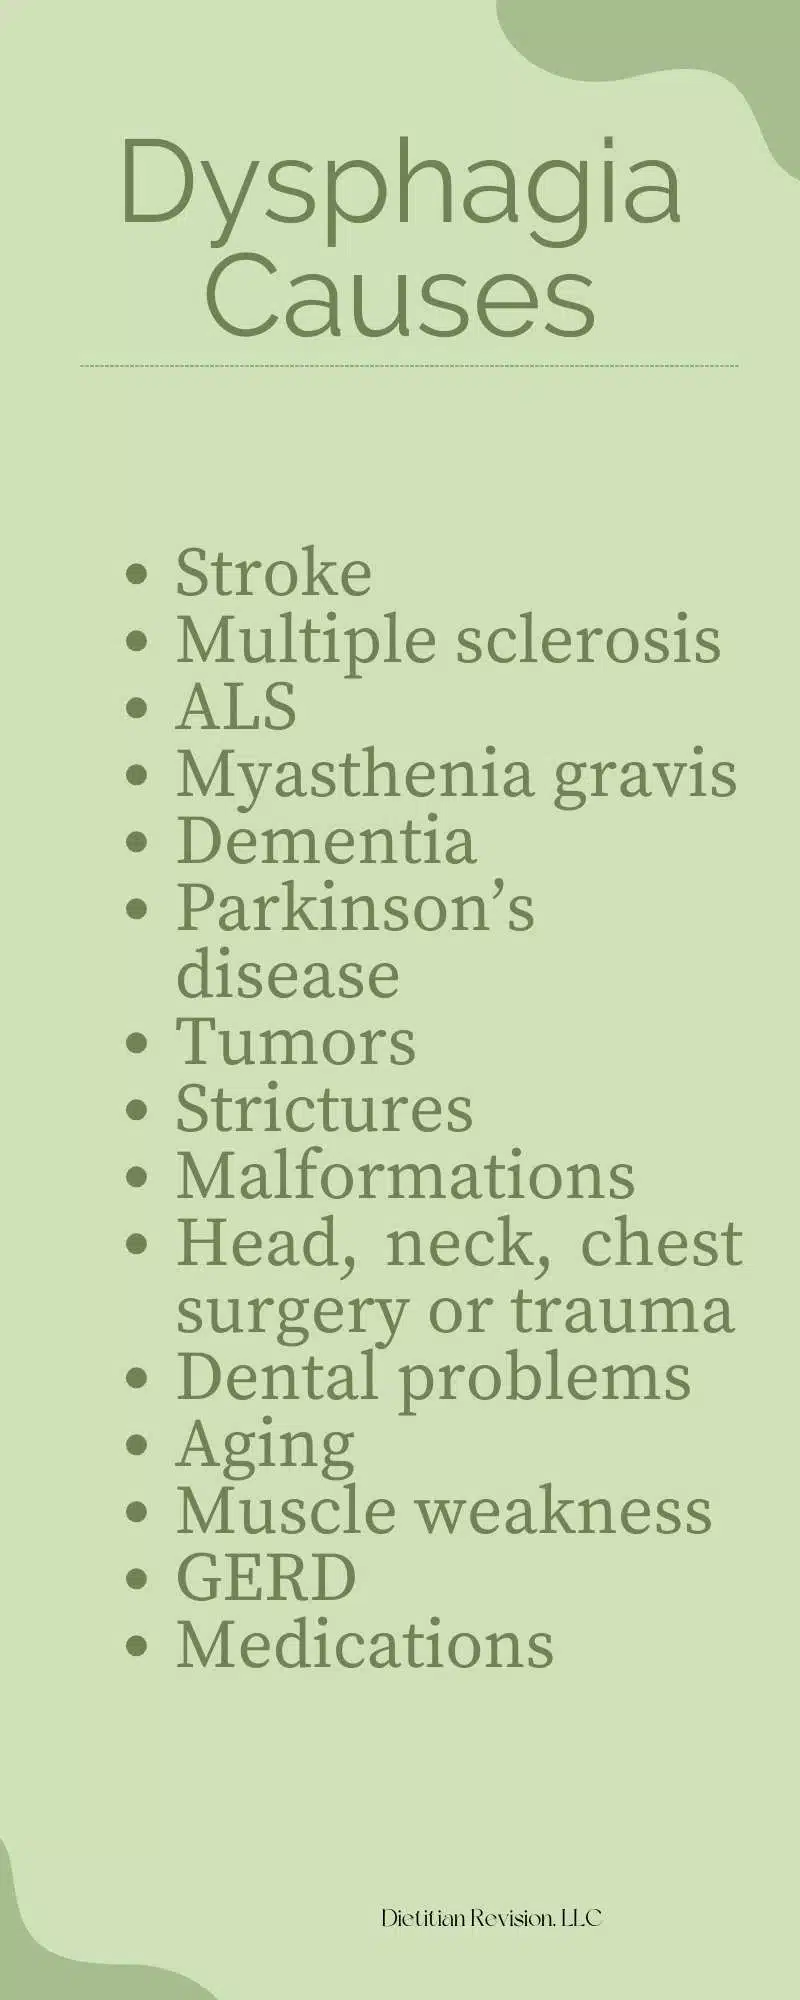 List of causes of dysphagia: stroke, MS, ALS, myasthenia gravis, Parkinson's, tumors, strictures, malformations, head neck chest surgery, dental problems, aging, muscle weakness, GERD, medications. 